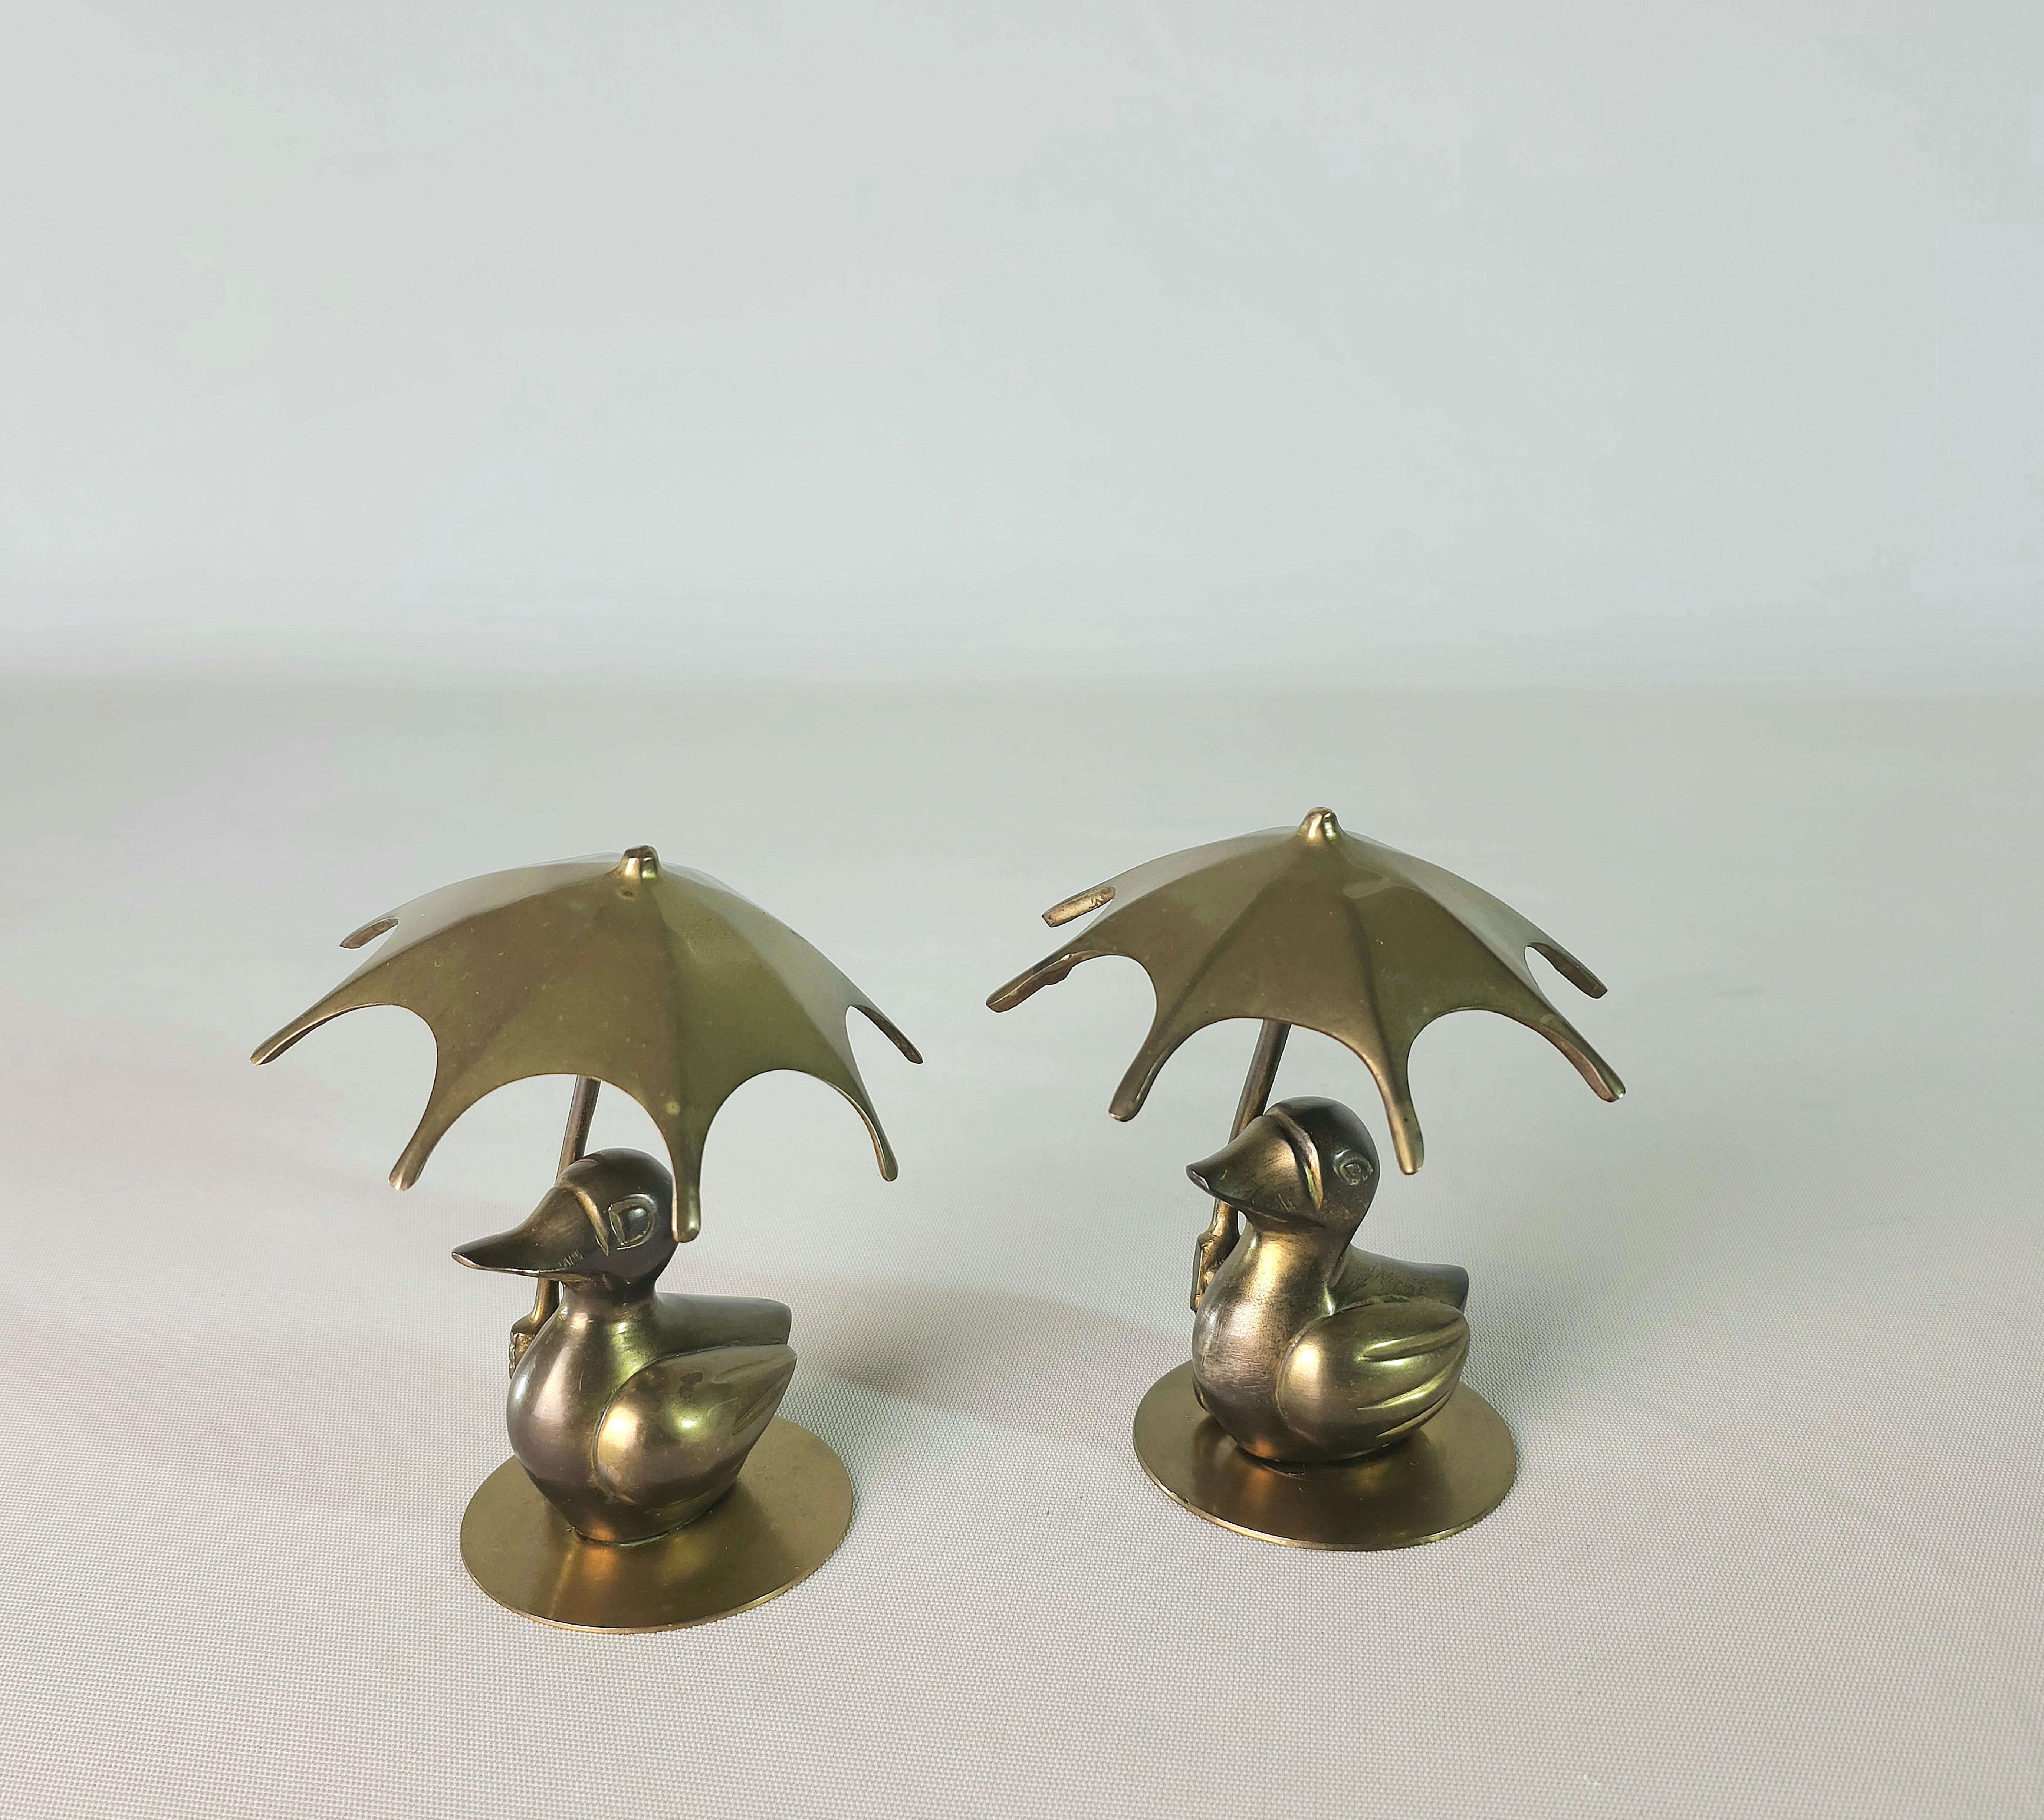 20th Century Two Brass Decorative Objects Midcentury Modern Italia 1960/70s For Sale